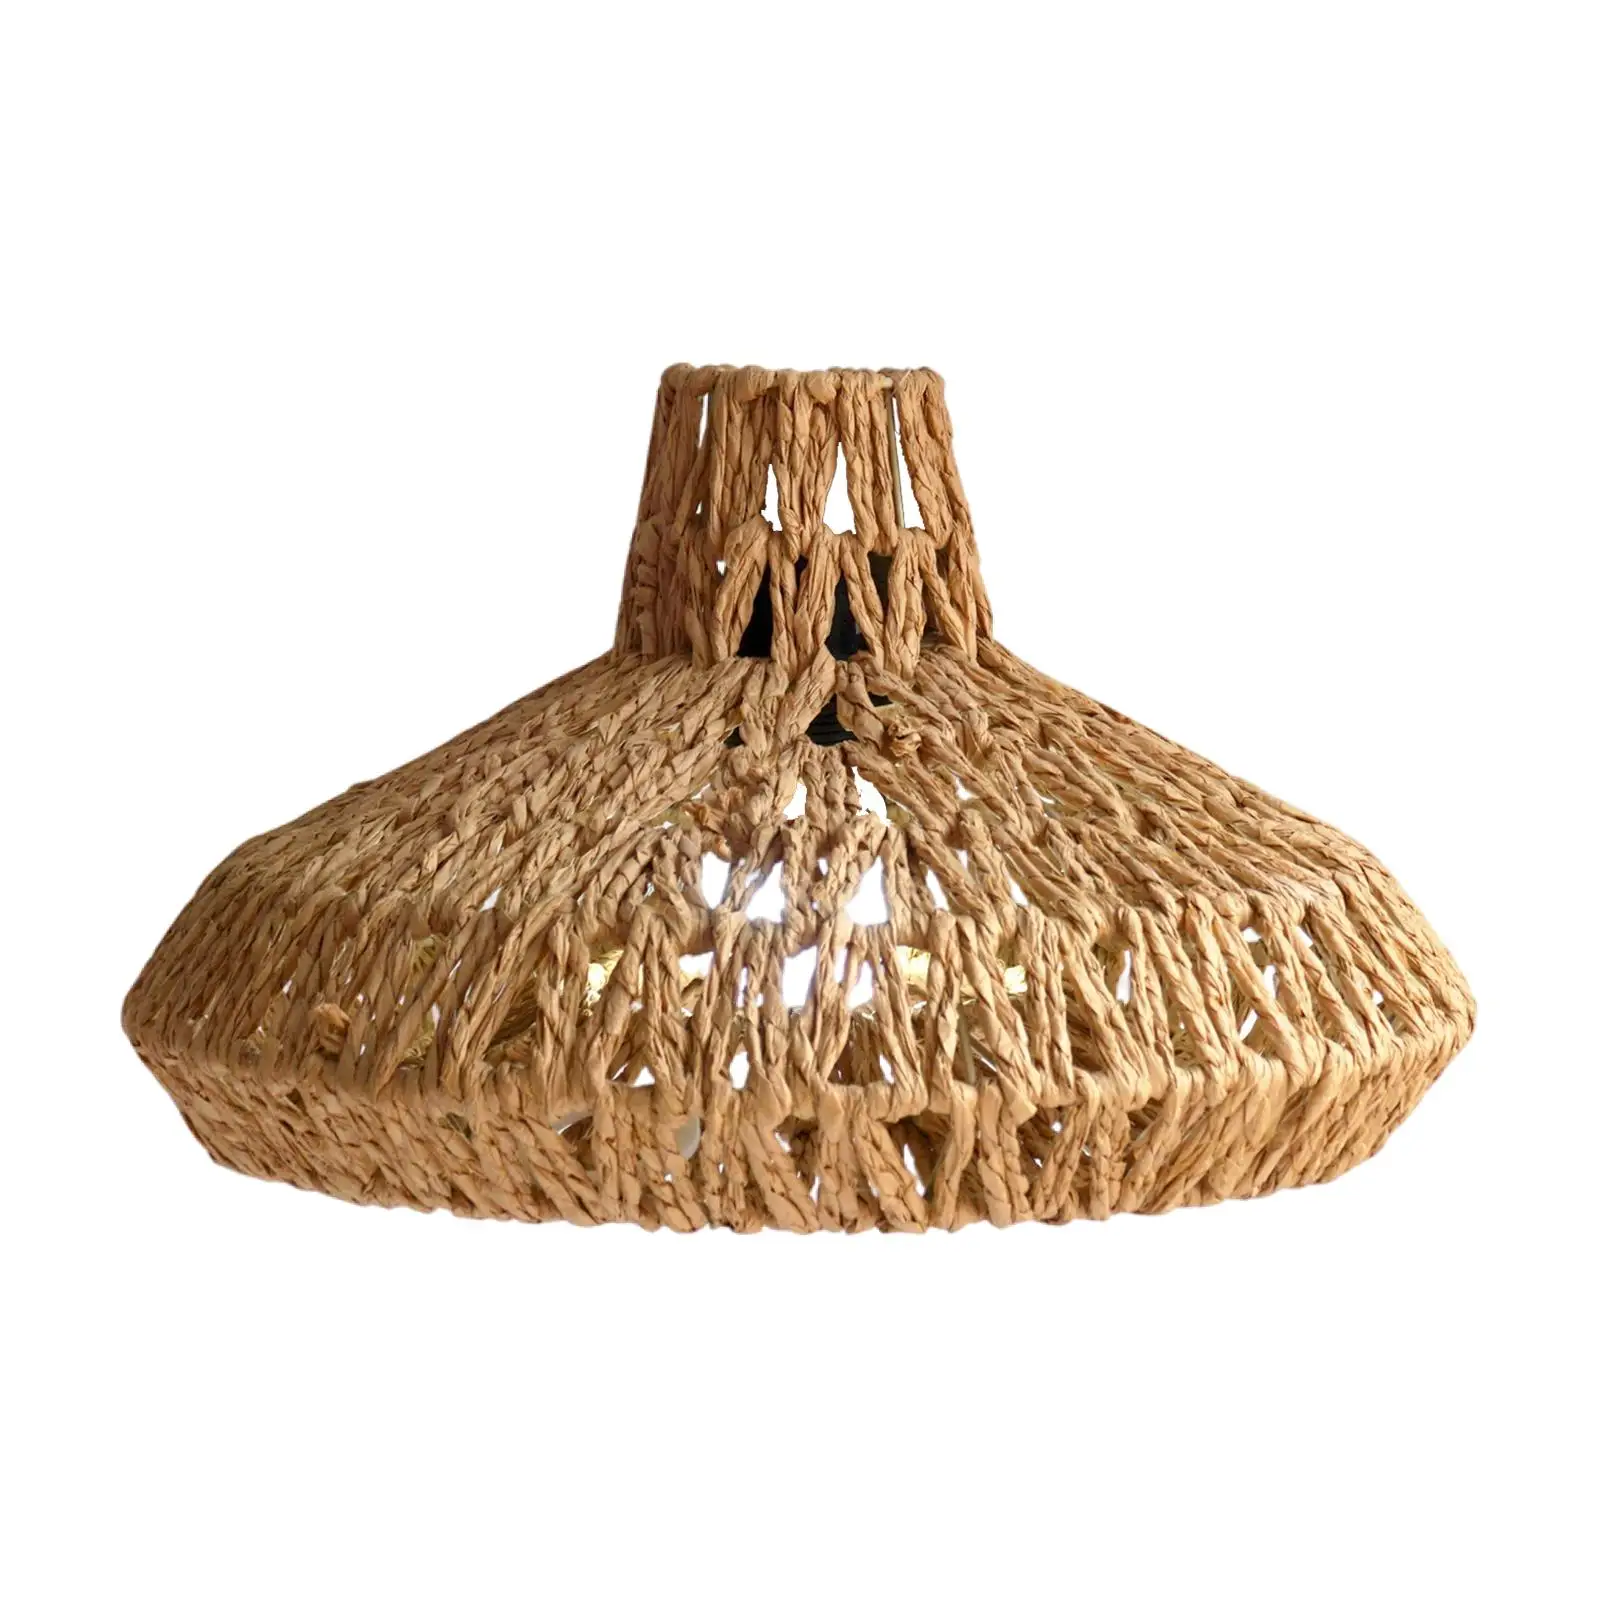 Pendant Light Shade, Rattan Basket Chandelier Lamp Shade, Weave Cage Guard, Rustic Hanging Light Fixture Teahouse